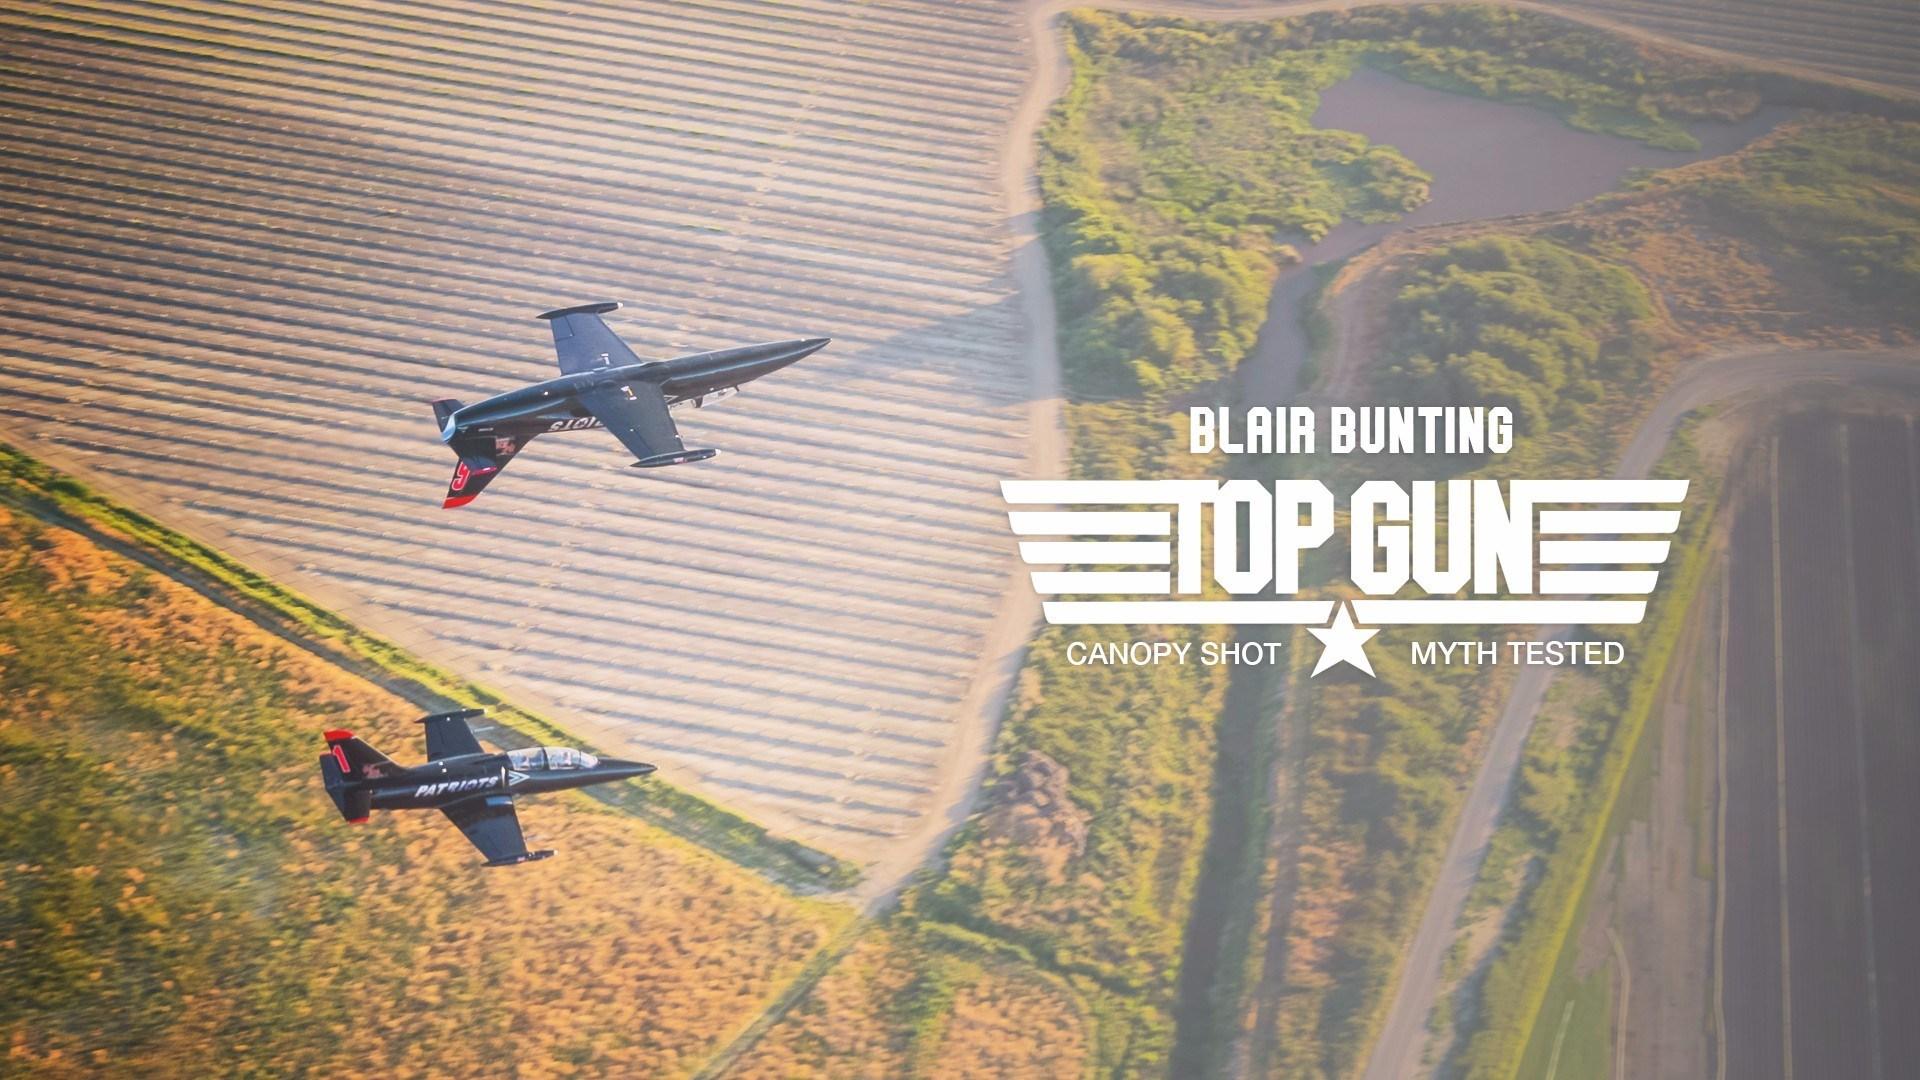 Behind the Scenes: How We Made The Top Gun Video. Planet Unicorn